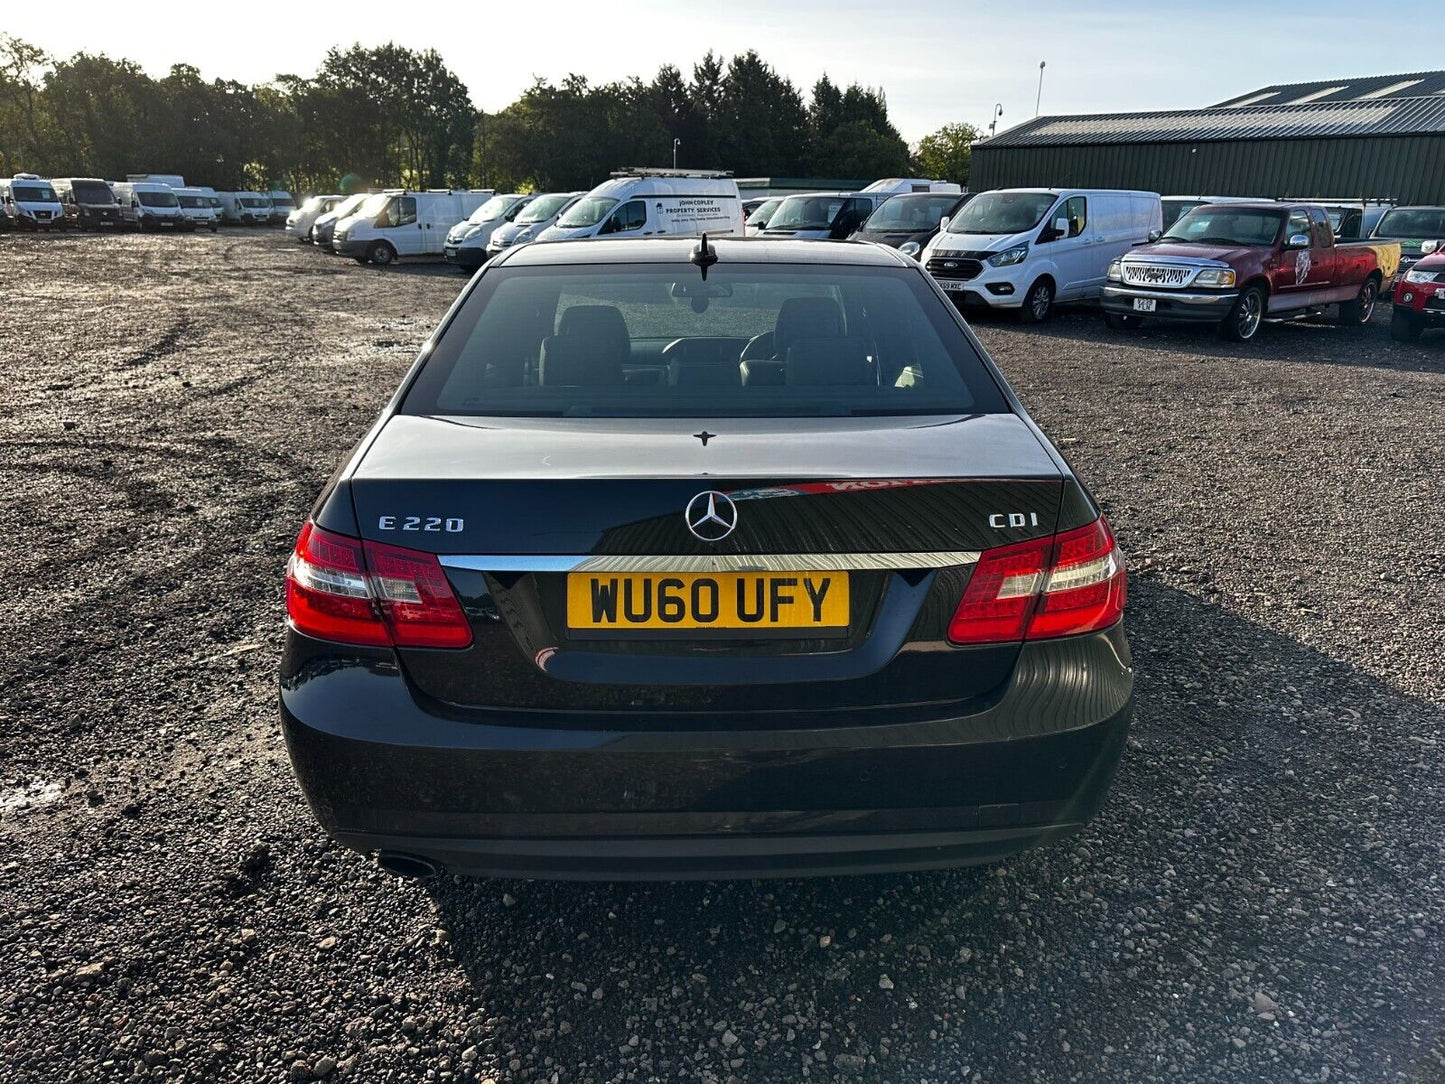 Bid on 60 PLATE MERCEDES-BENZ E CLASS E220 2.2 CDI BLUEEFFICIENCY SPORT AUTOMATIC - NO VAT ON HAMMER- Buy &amp; Sell on Auction with EAMA Group